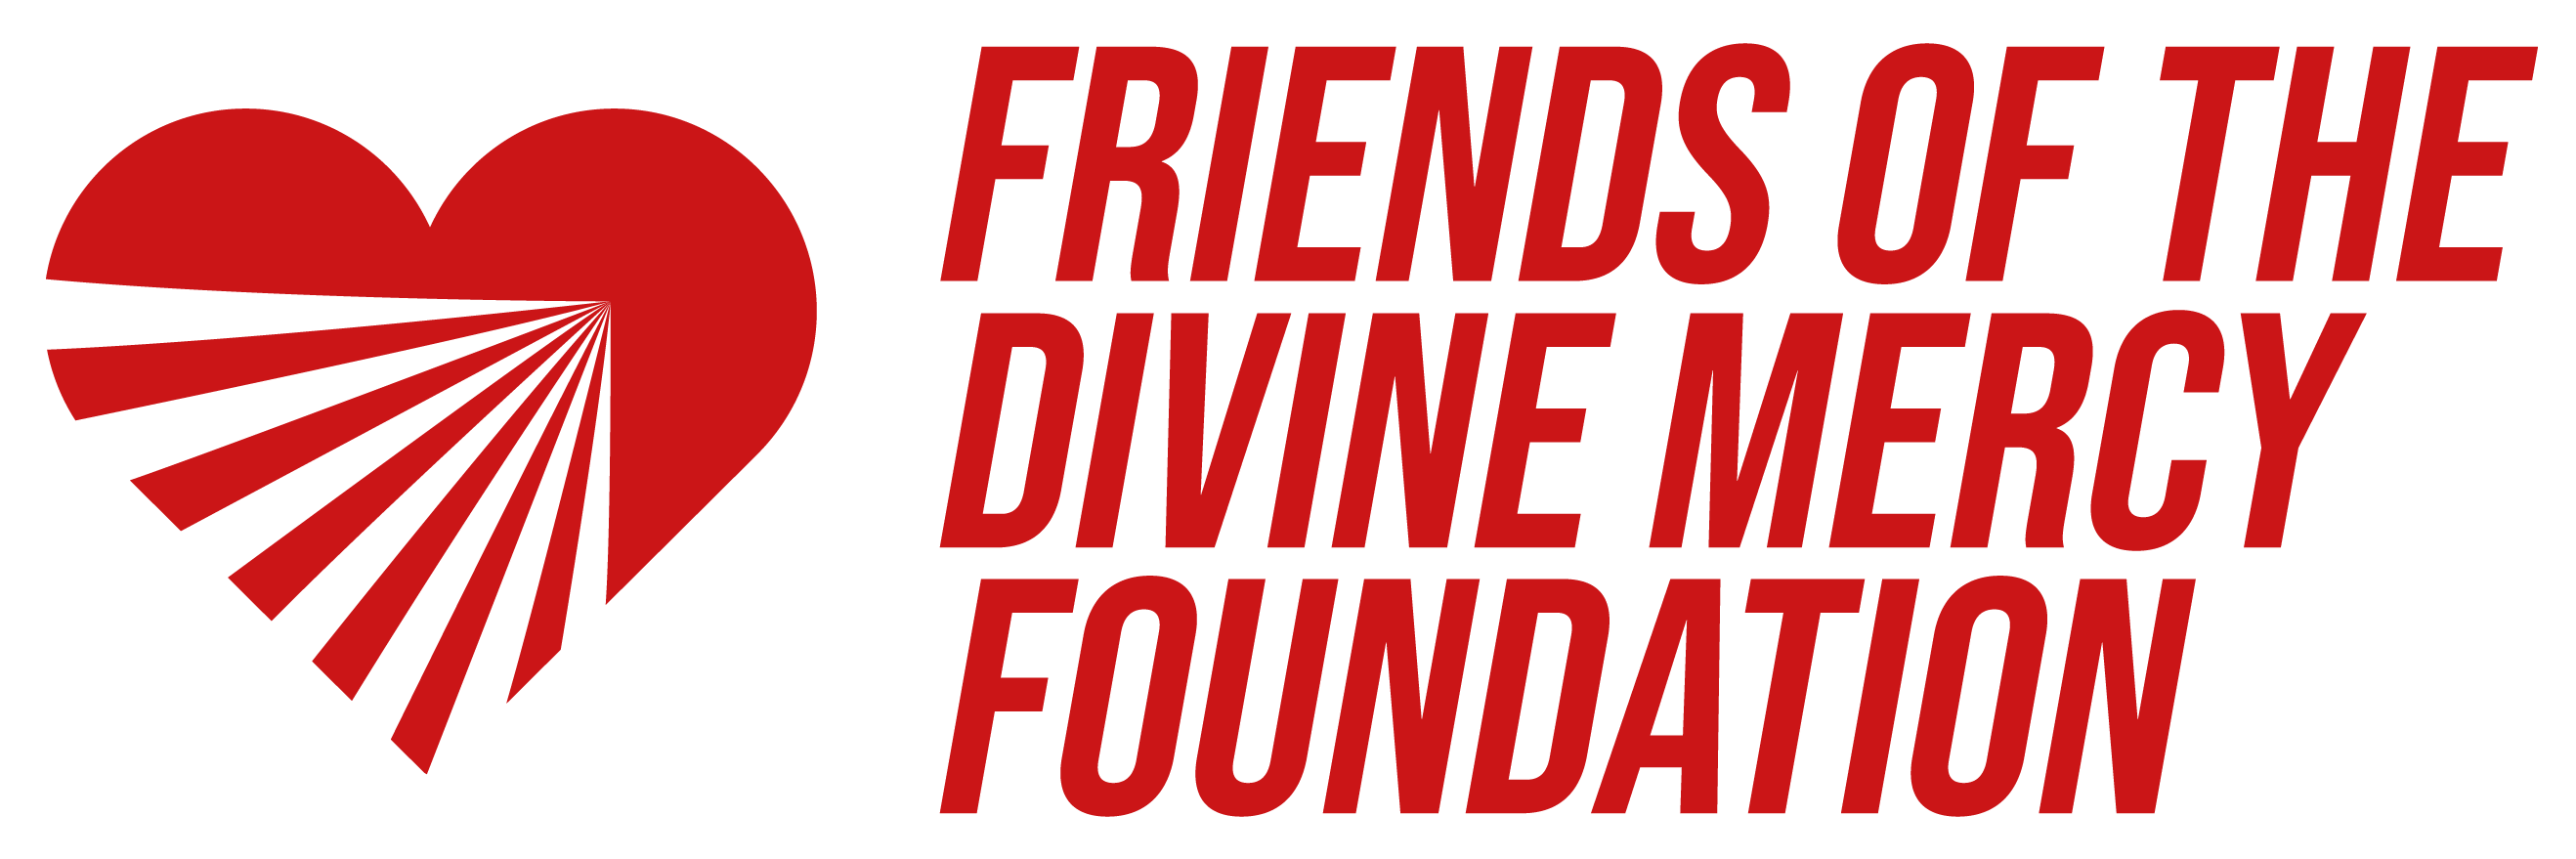 Friends of the Divine Mercy Foundation